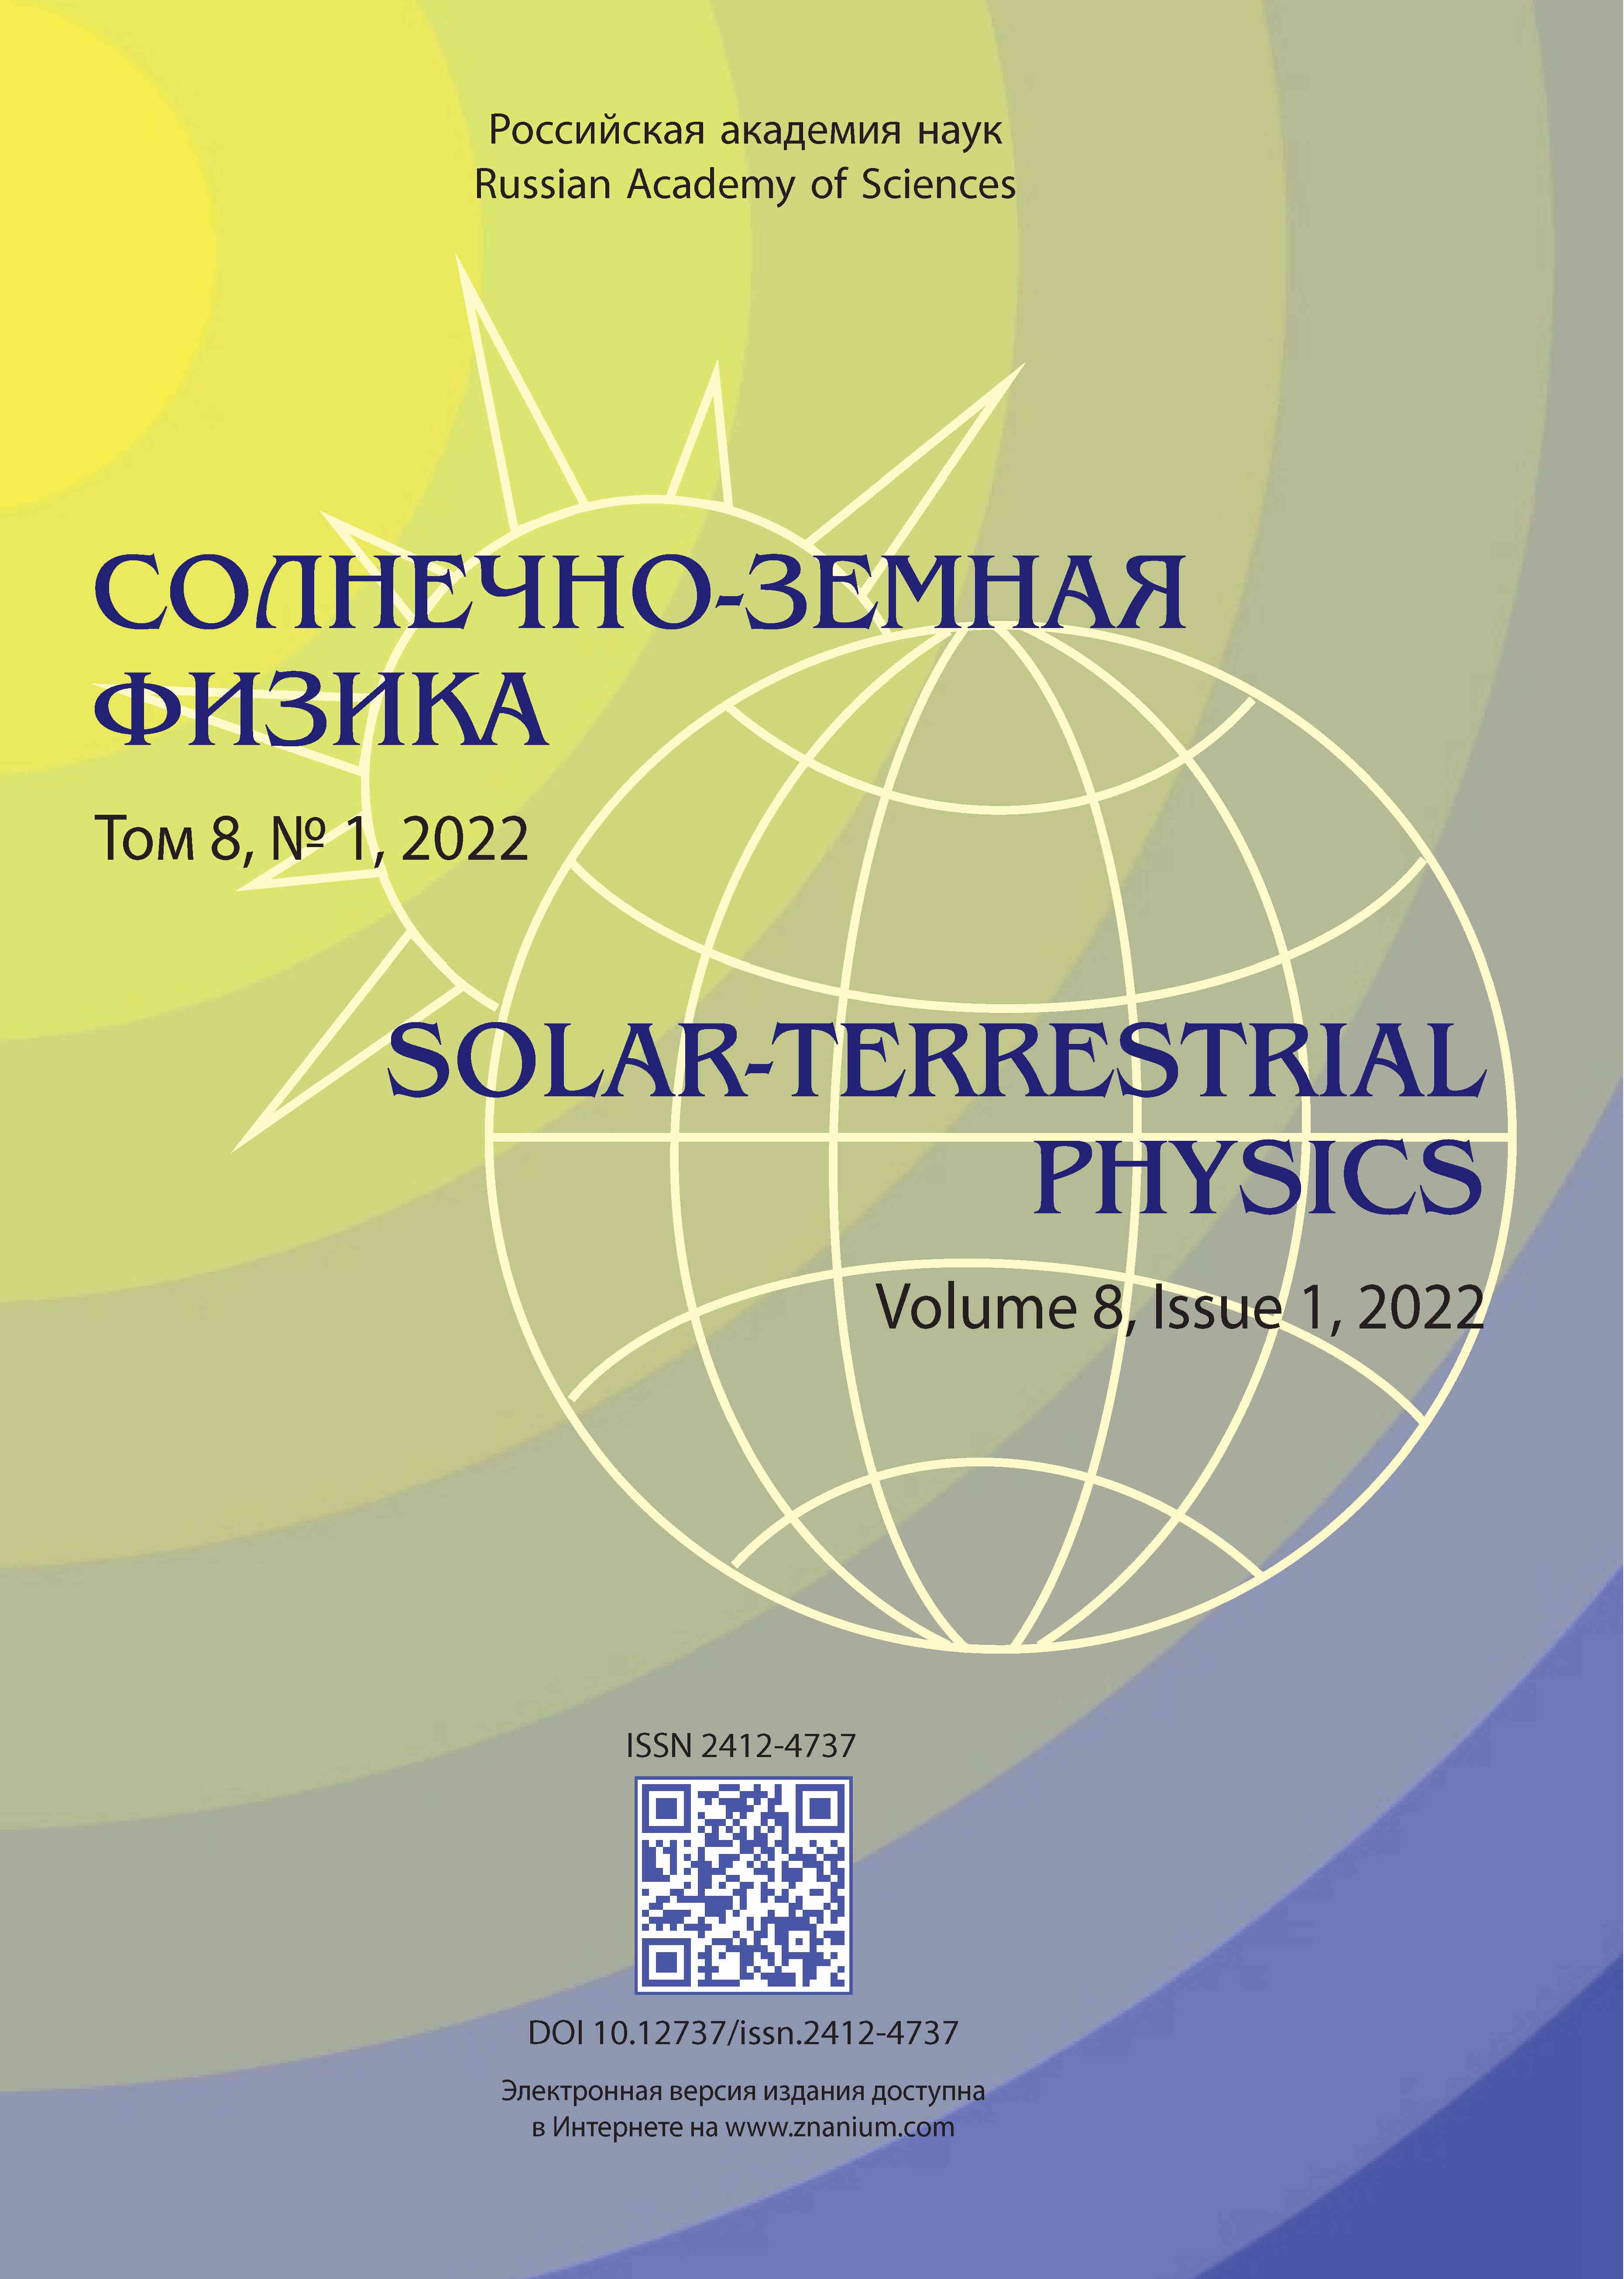                         Long-term trend of the ionospheric E-layer response to solar flares
            